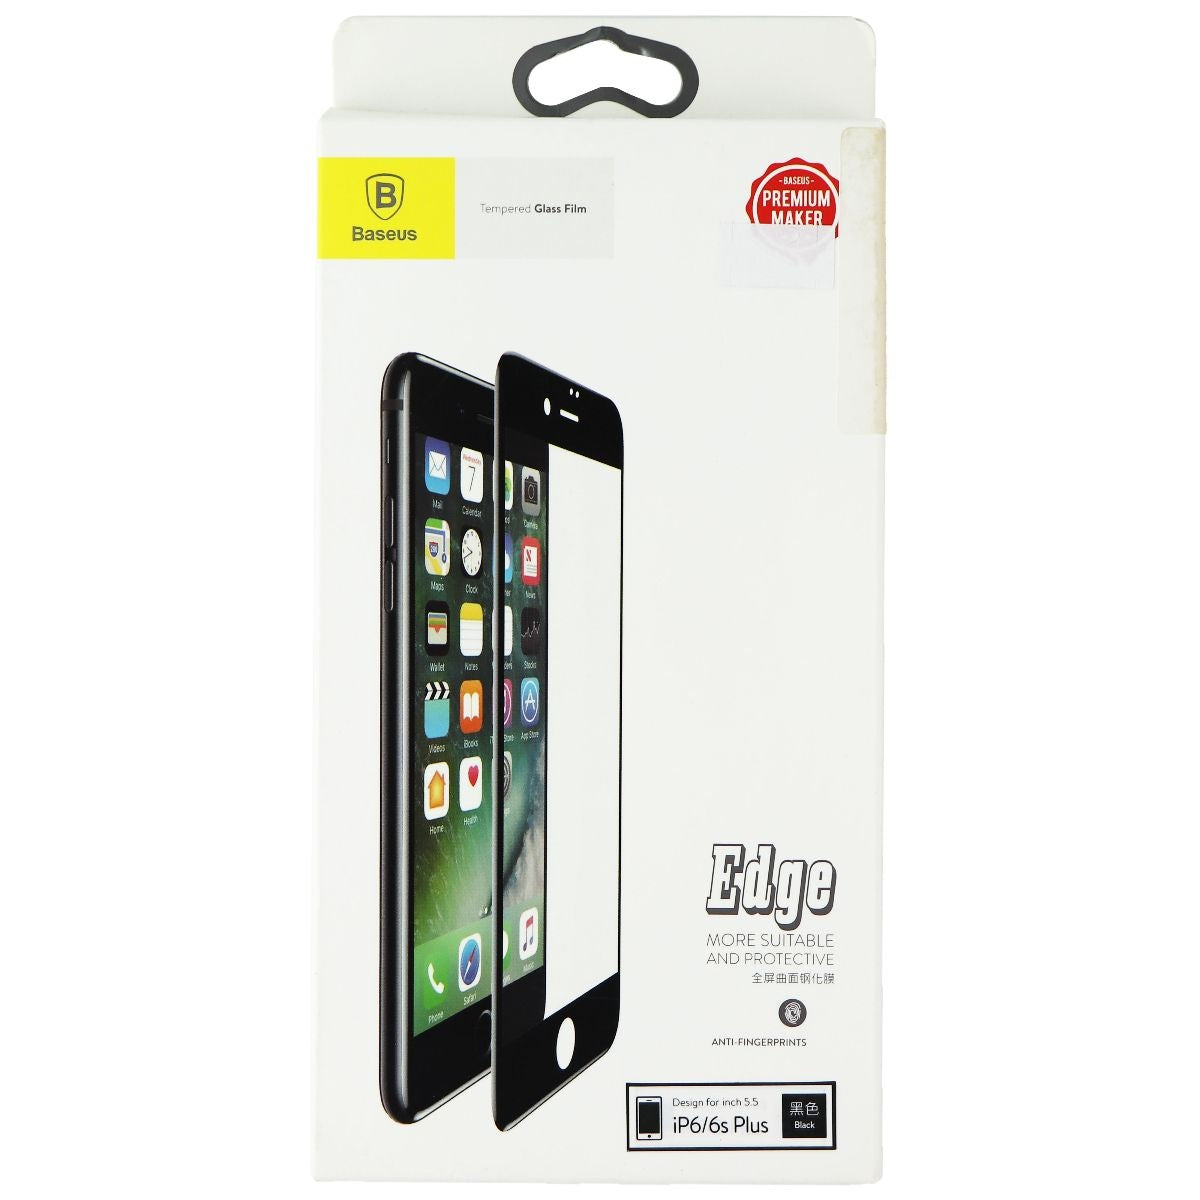 Baseus Arc Tempered Glass Film for iPhone 6 Plus / 6s Plus - Black Trim Cell Phone - Screen Protectors Baseus    - Simple Cell Bulk Wholesale Pricing - USA Seller